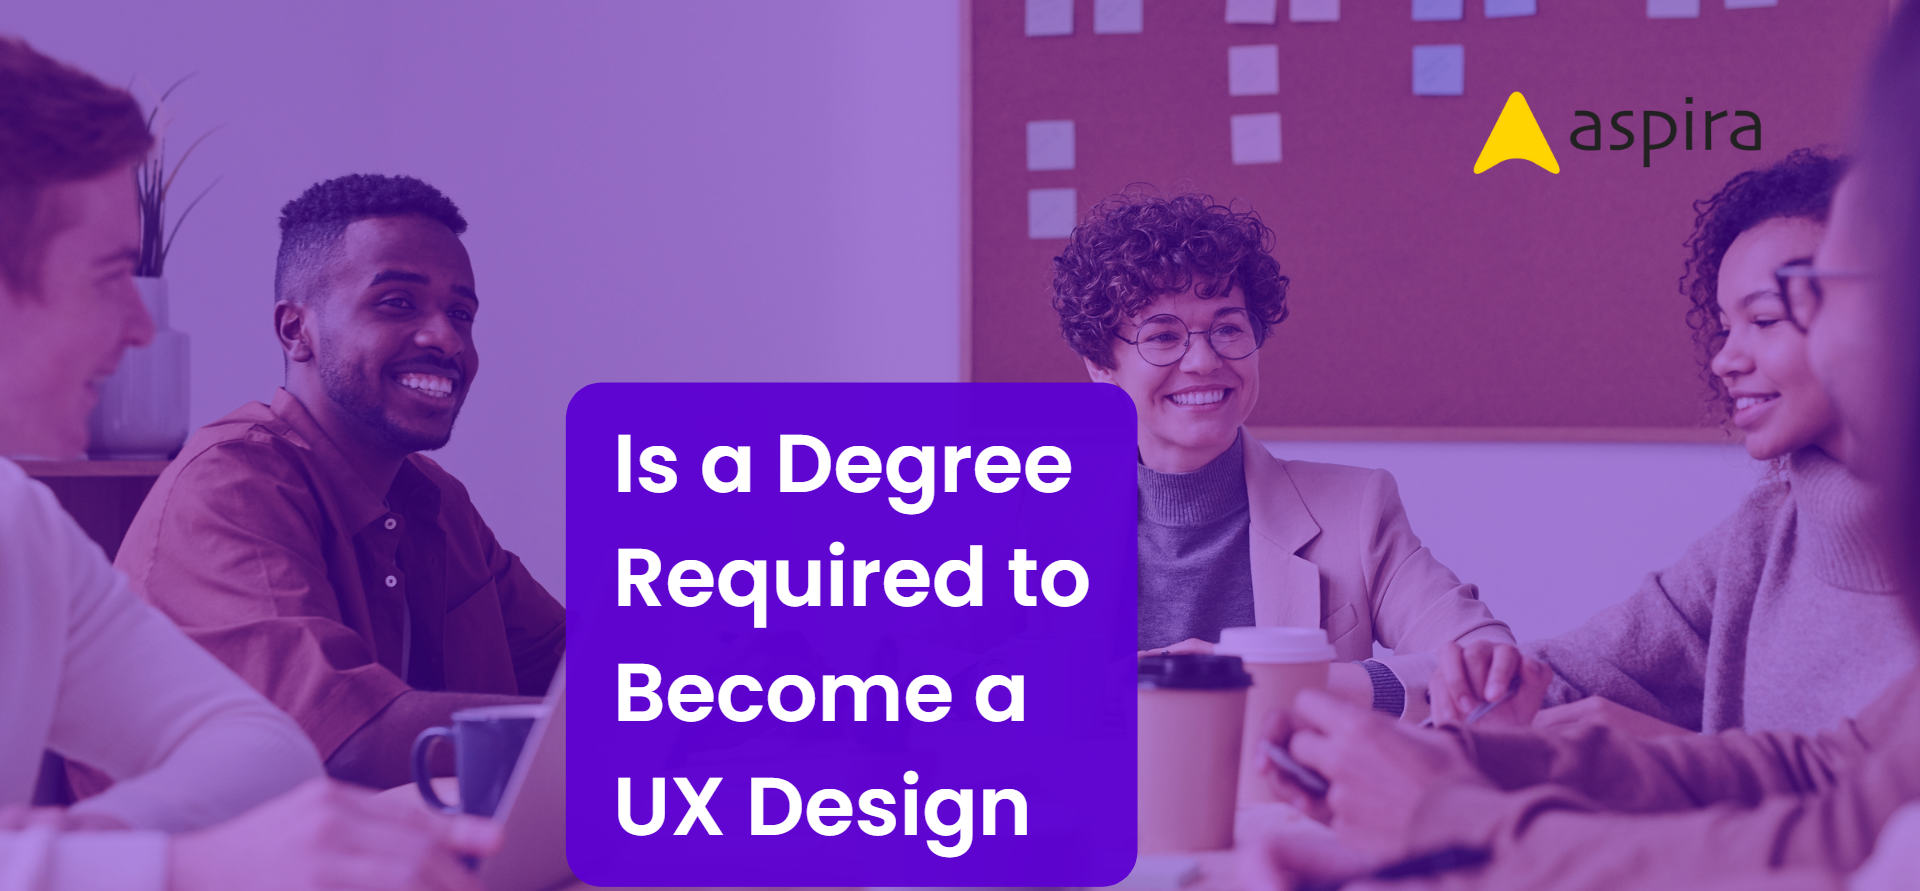 Is a Degree Required to Become a UX Design